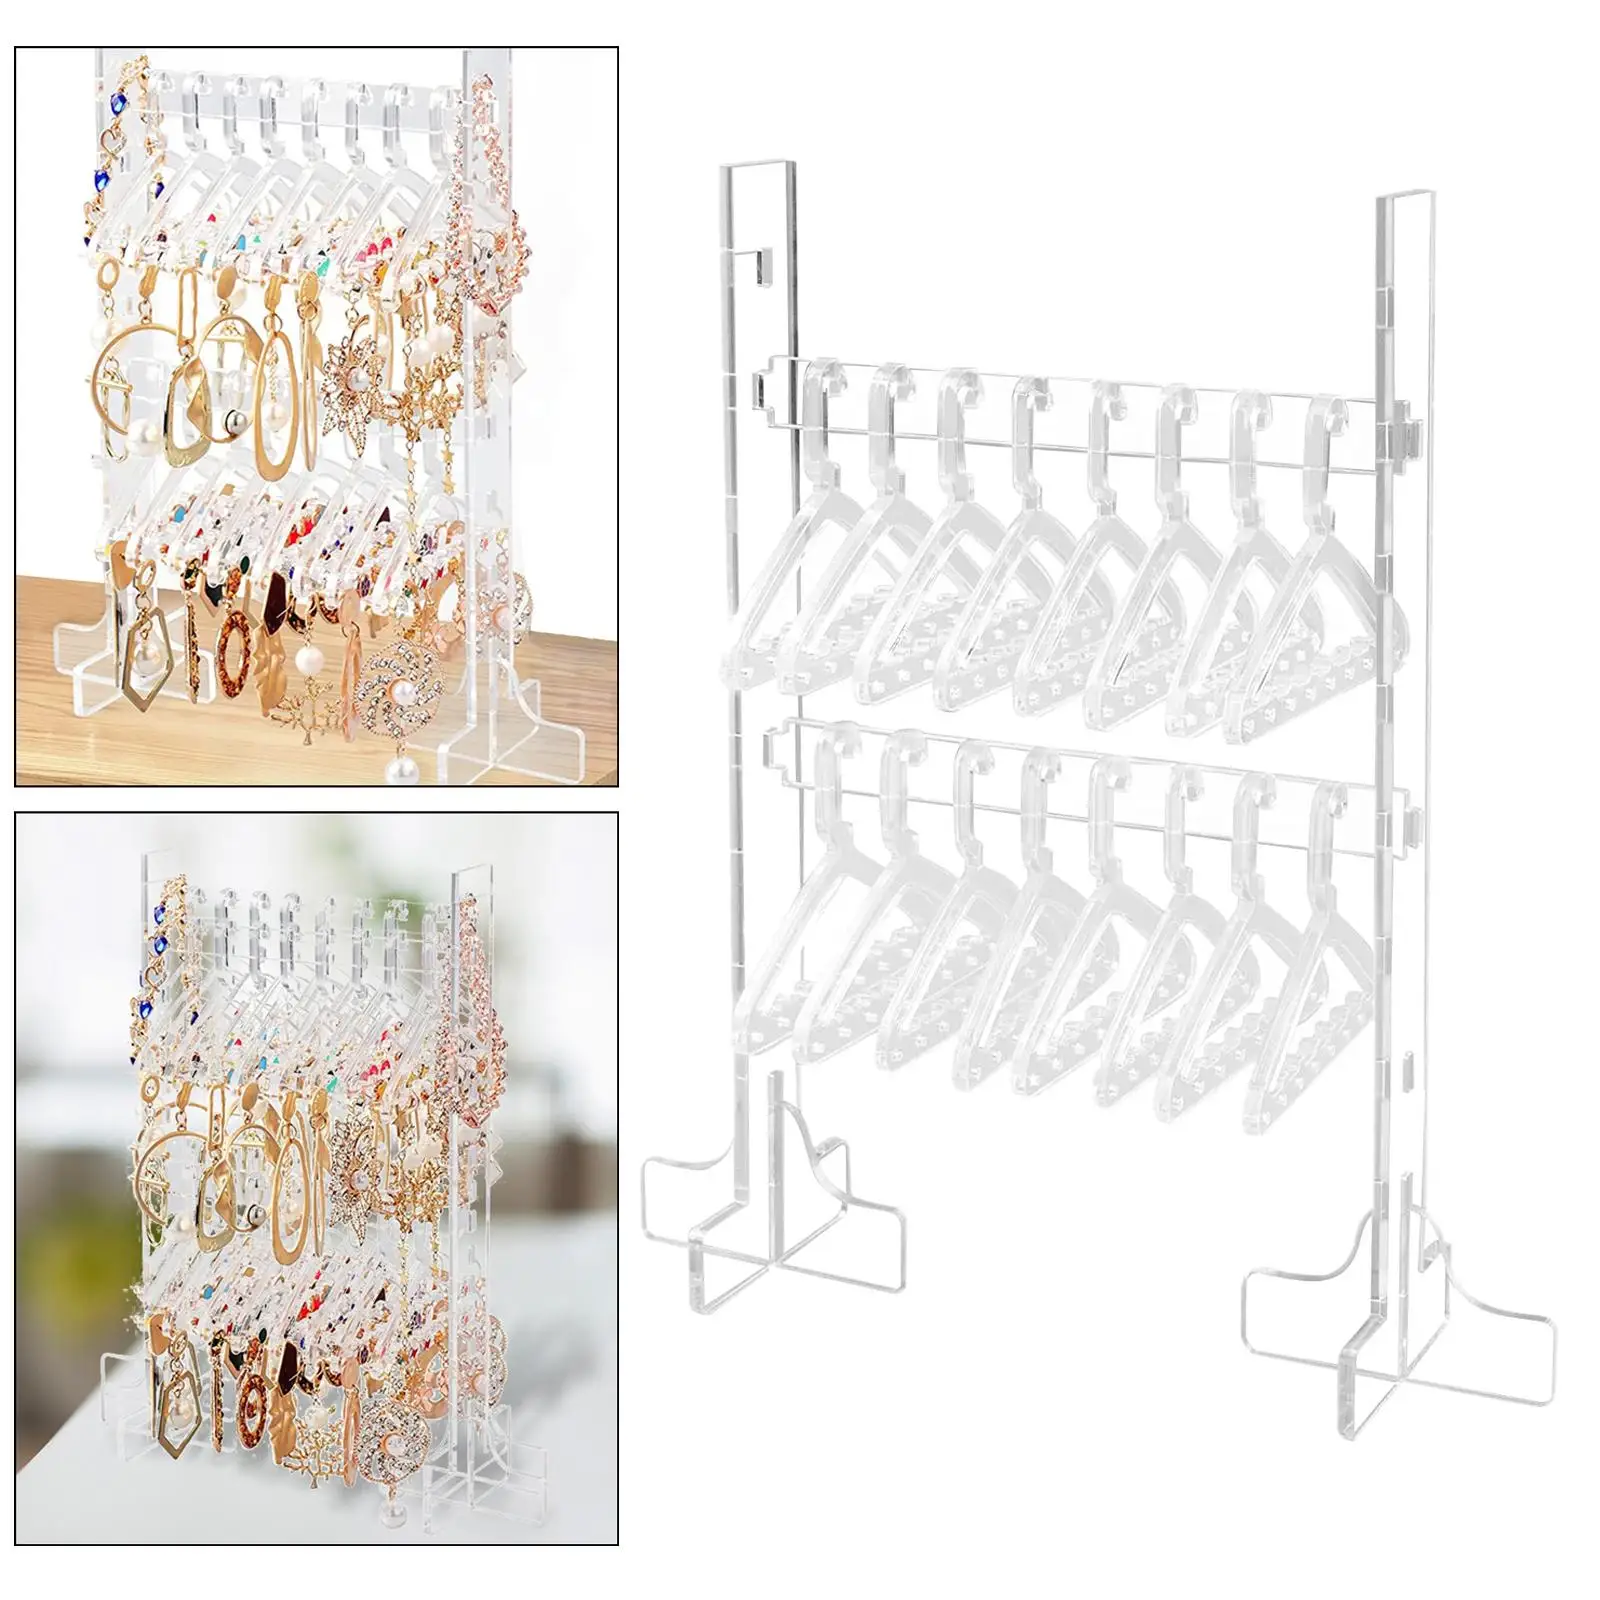 ear Stud Display Stand 128 Holes Jewelry Storage Holder Photography Props Earring Hanger Rack for Living Room Tabletop